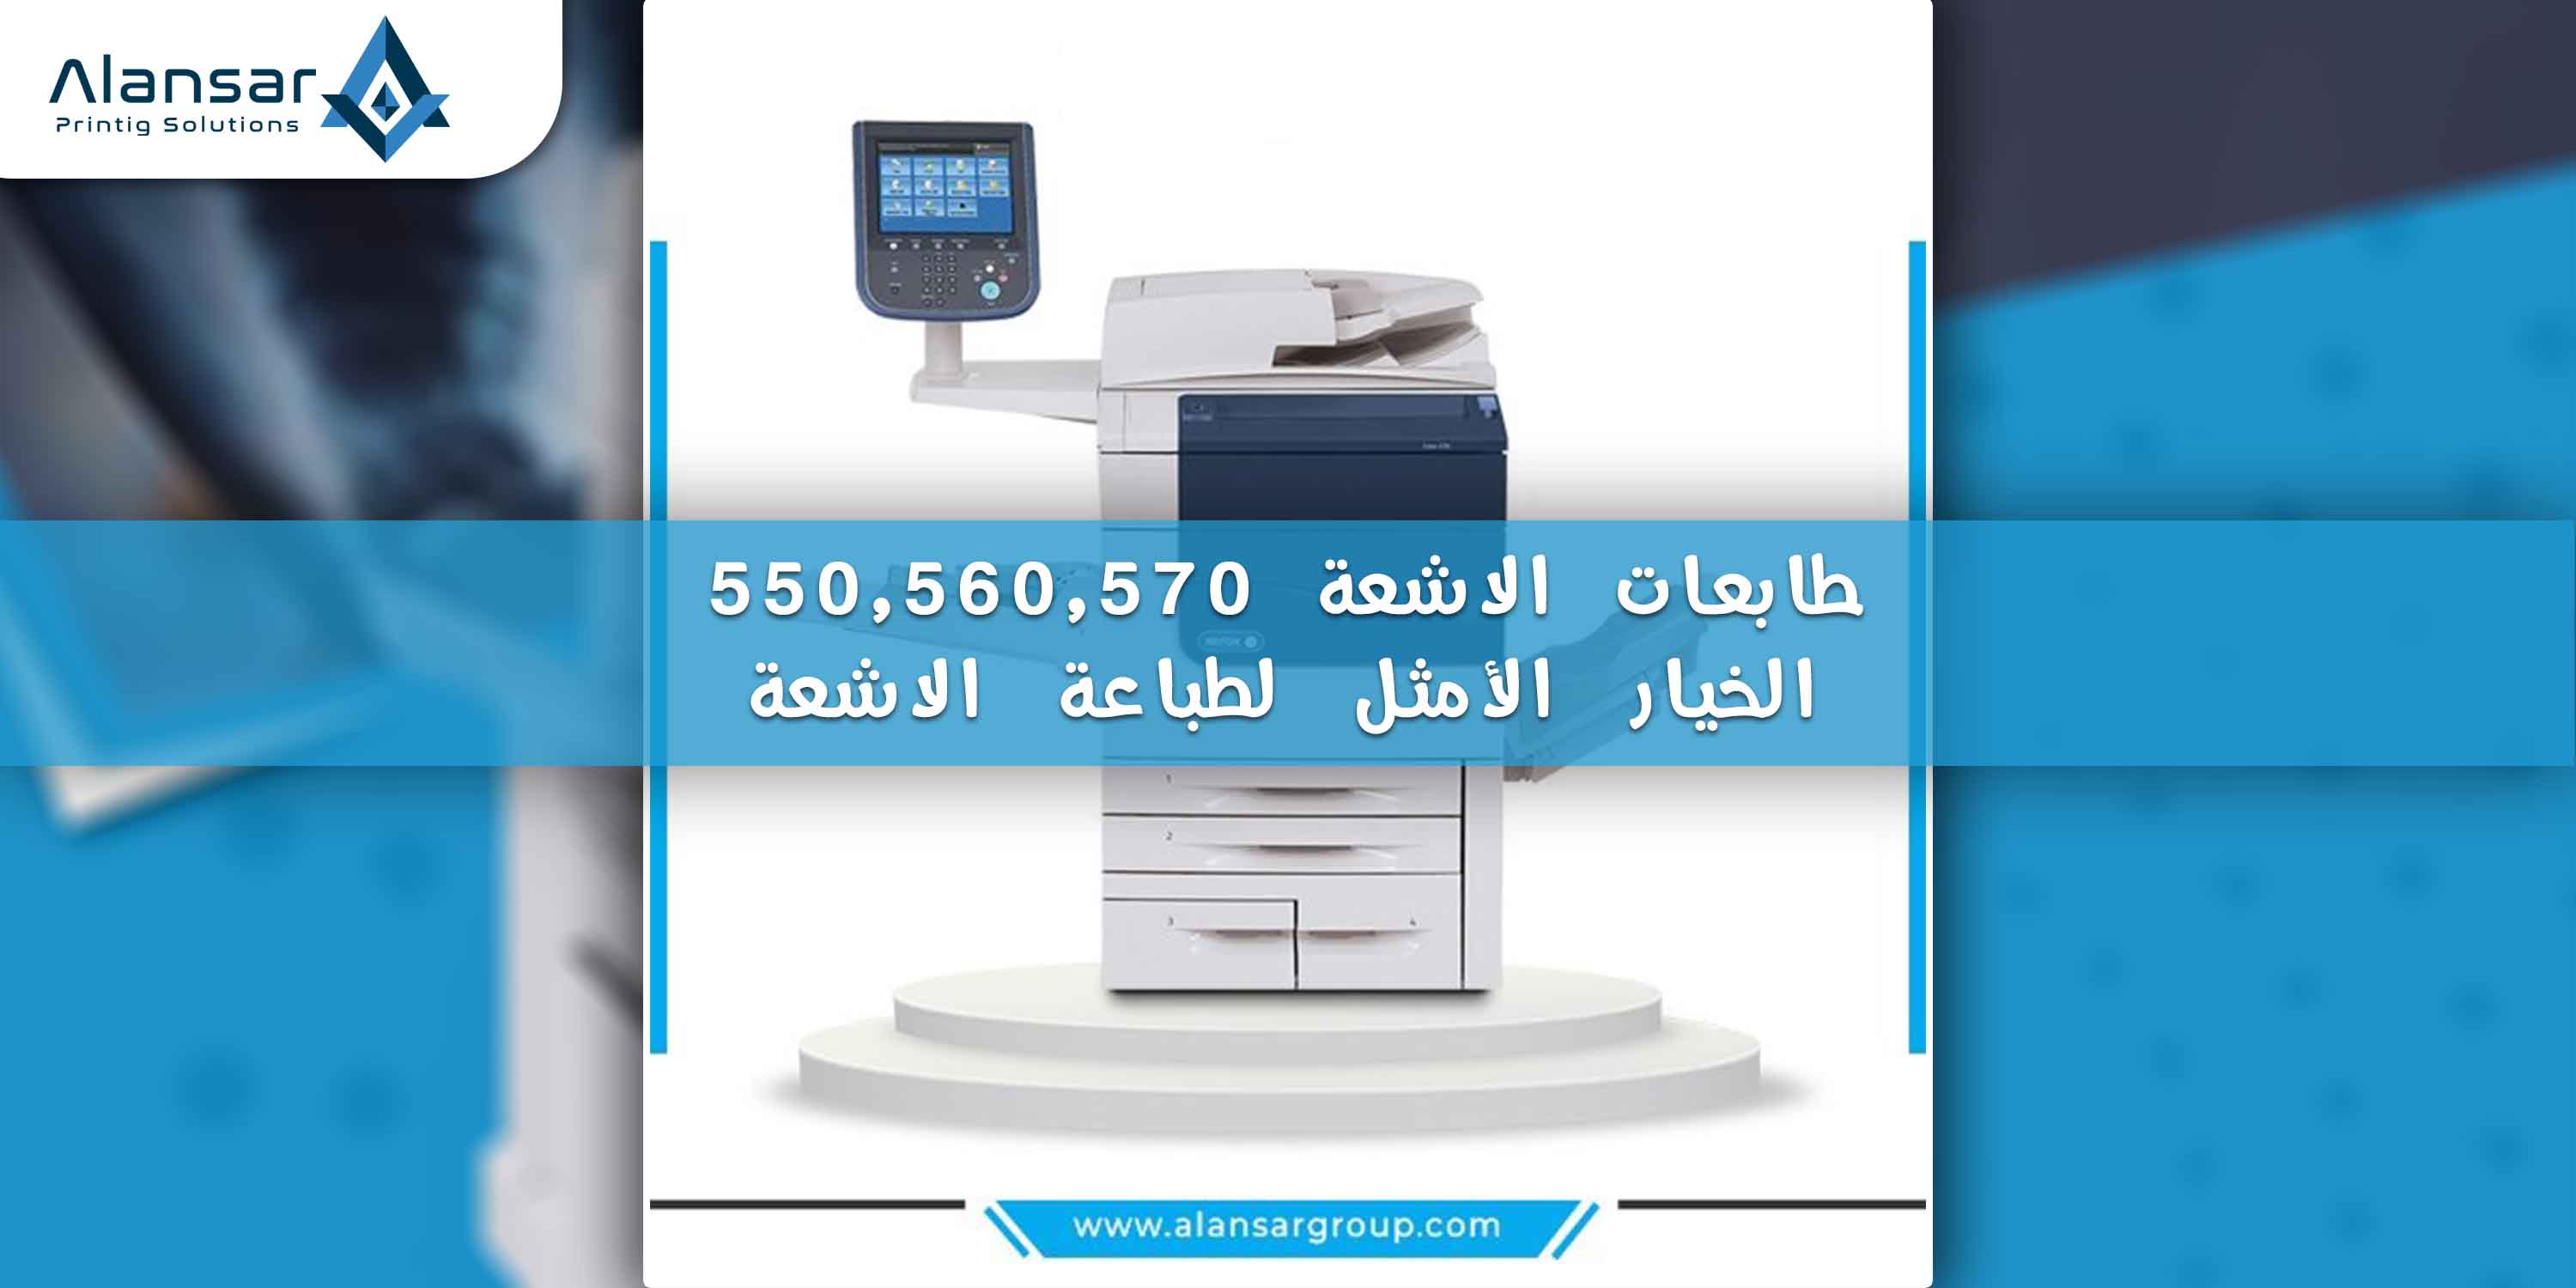 Radiology printers Xerox 550- 560- 570 the highest in print resolution